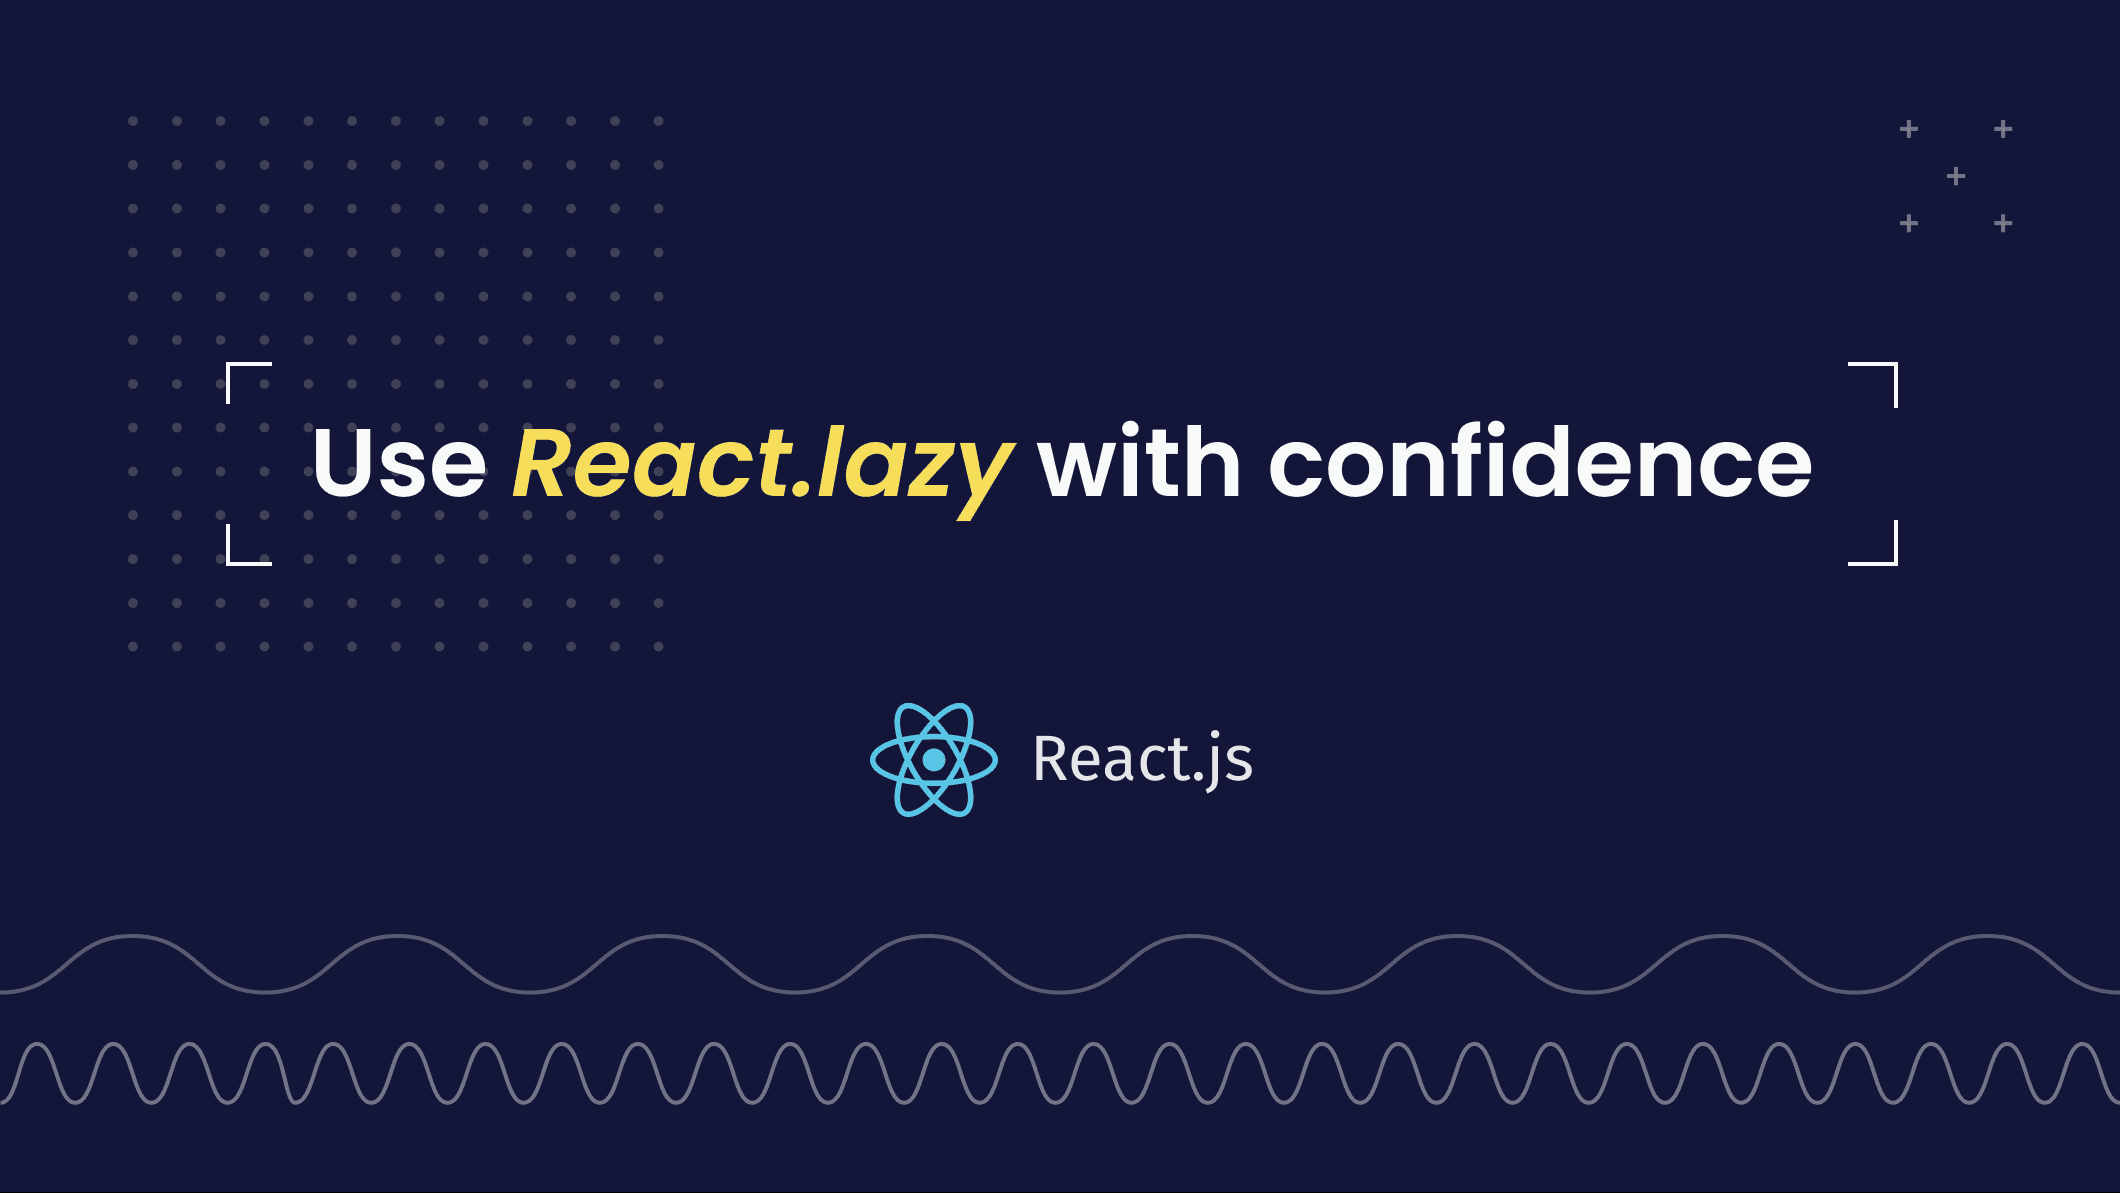 Use React.lazy with confidence: A safe way to load components when iterating fast